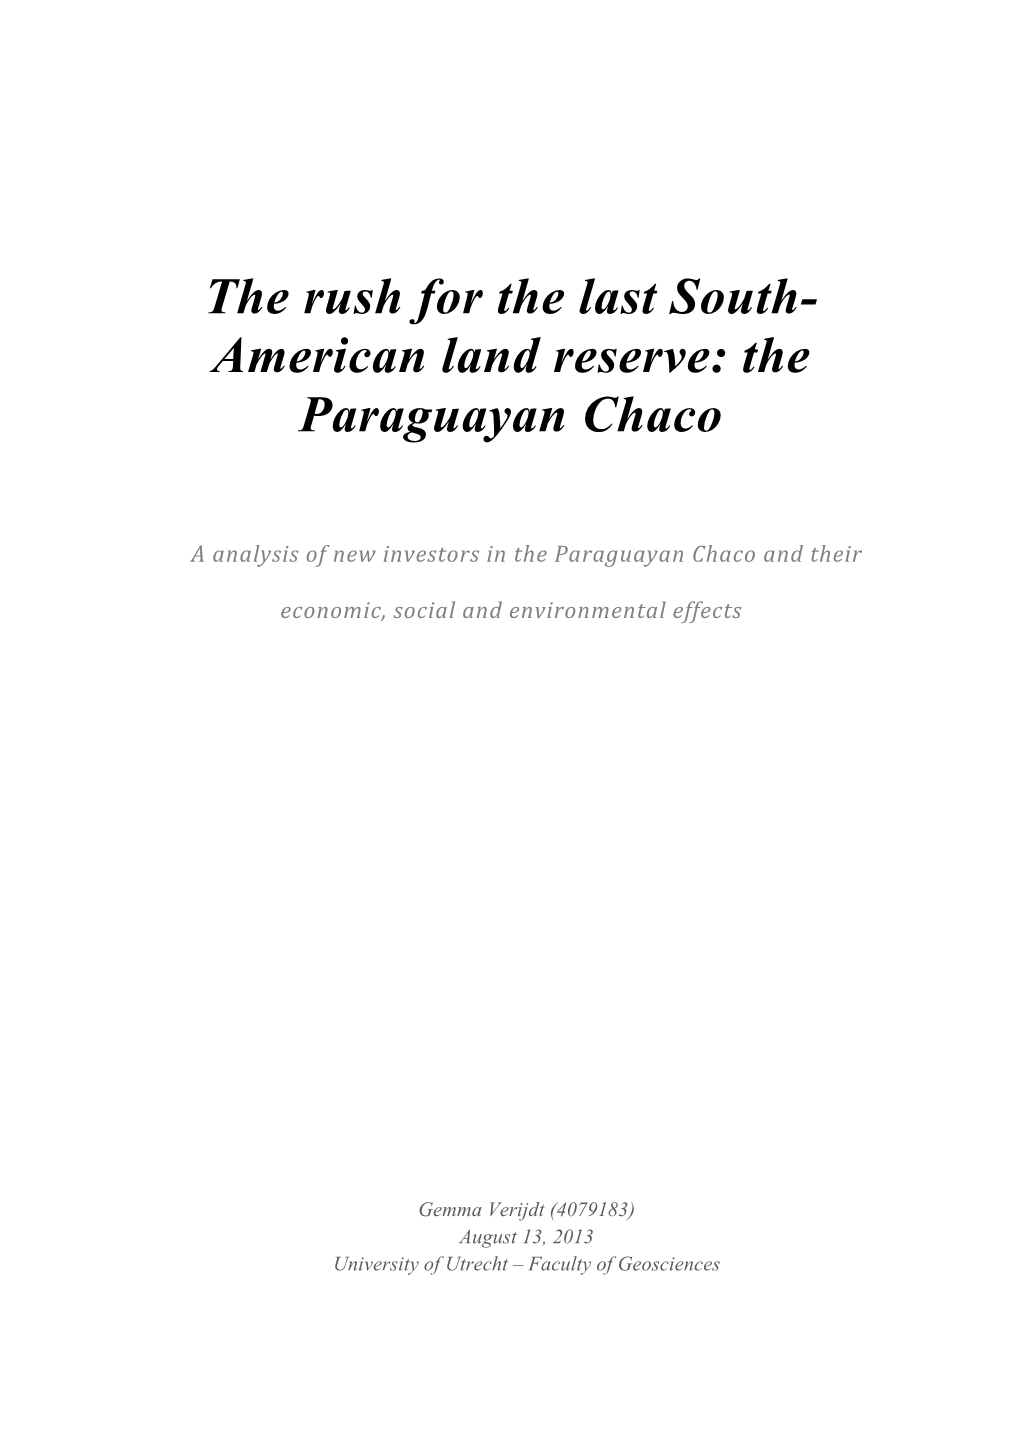 The Rush for the Last South- American Land Reserve: the Paraguayan Chaco